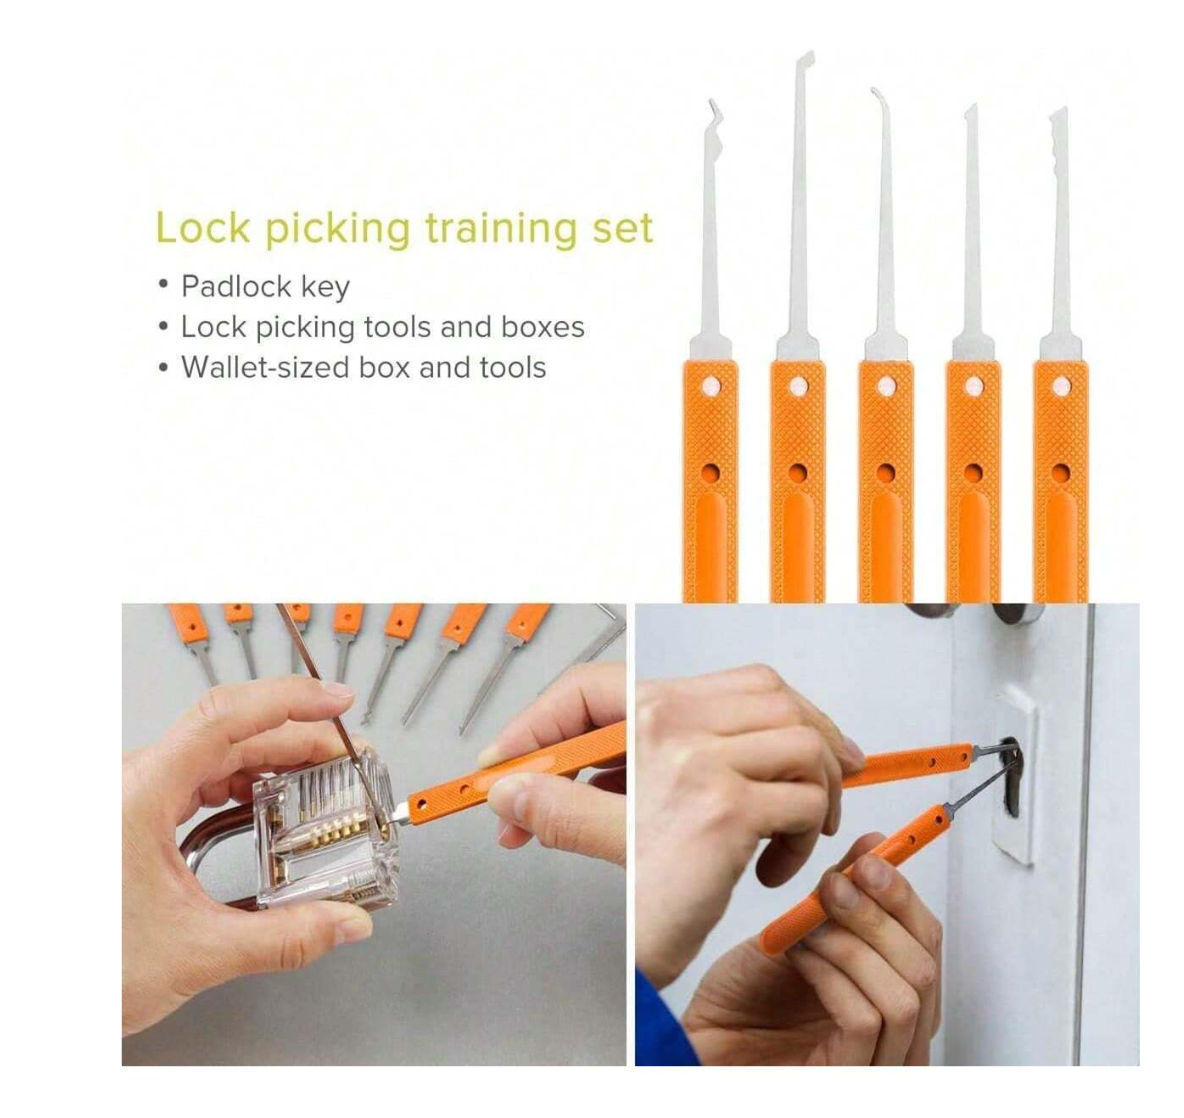 Unlock the Possibilities: 17Pcs Stainless Steel Lock Pick Set with Clear Practice Locks - Perfect for Beginners and Training! 🗝️🔒 #LockPickMasterclass